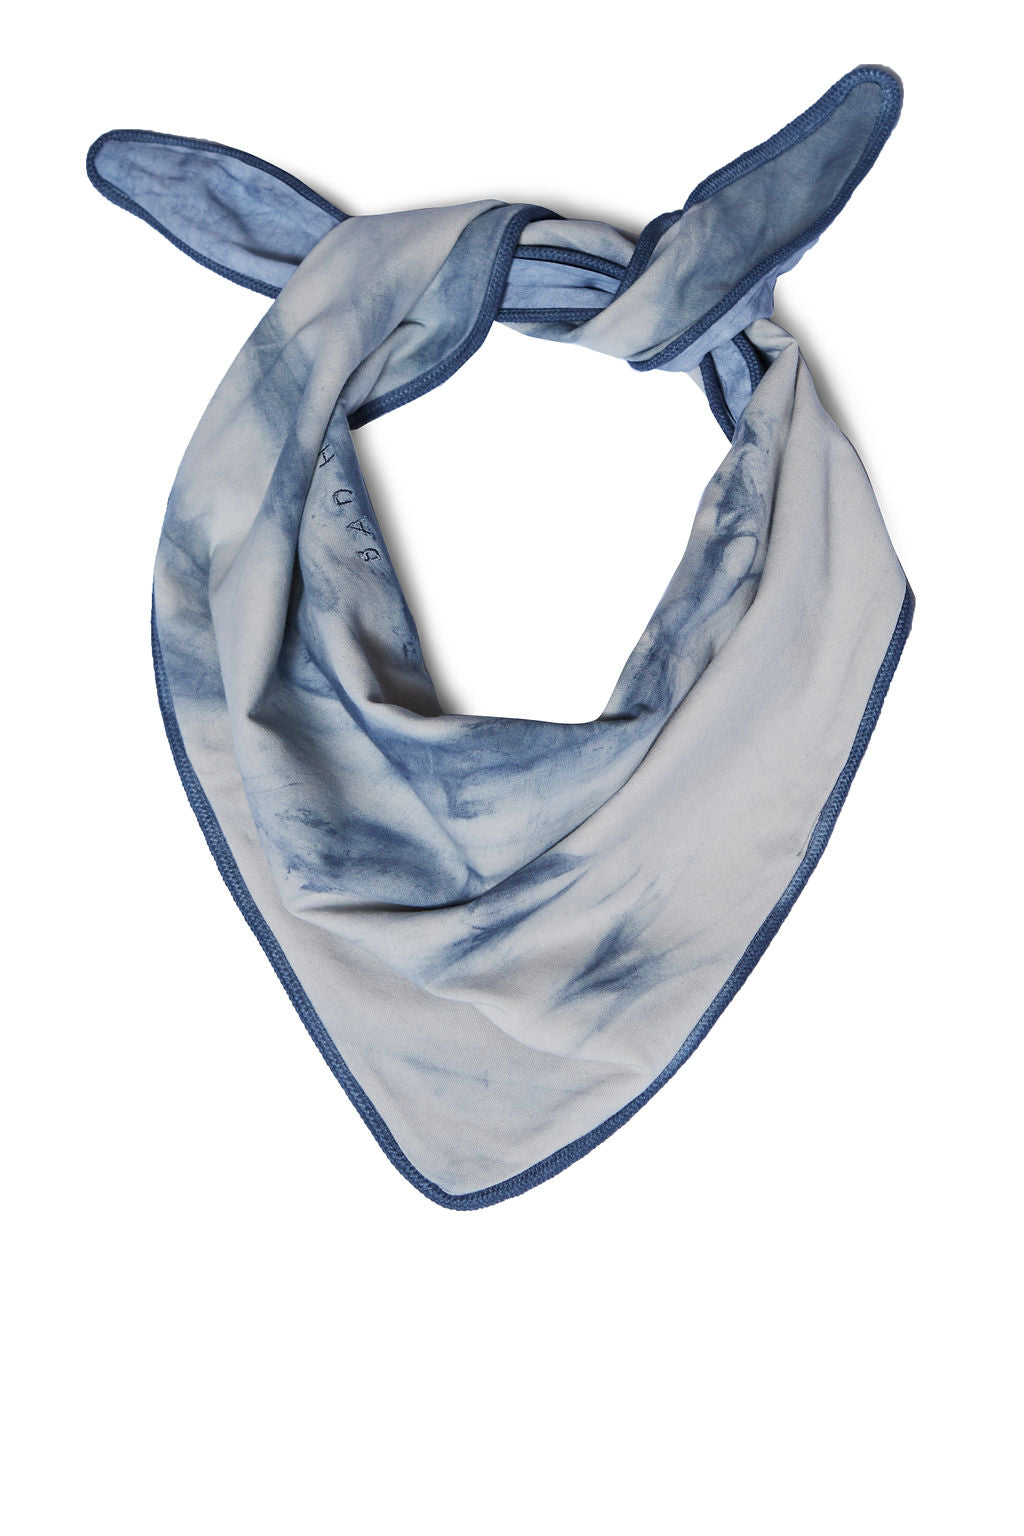 Waves / Blue Tides Dyed Bandana Neck Scarf and Head Scarf